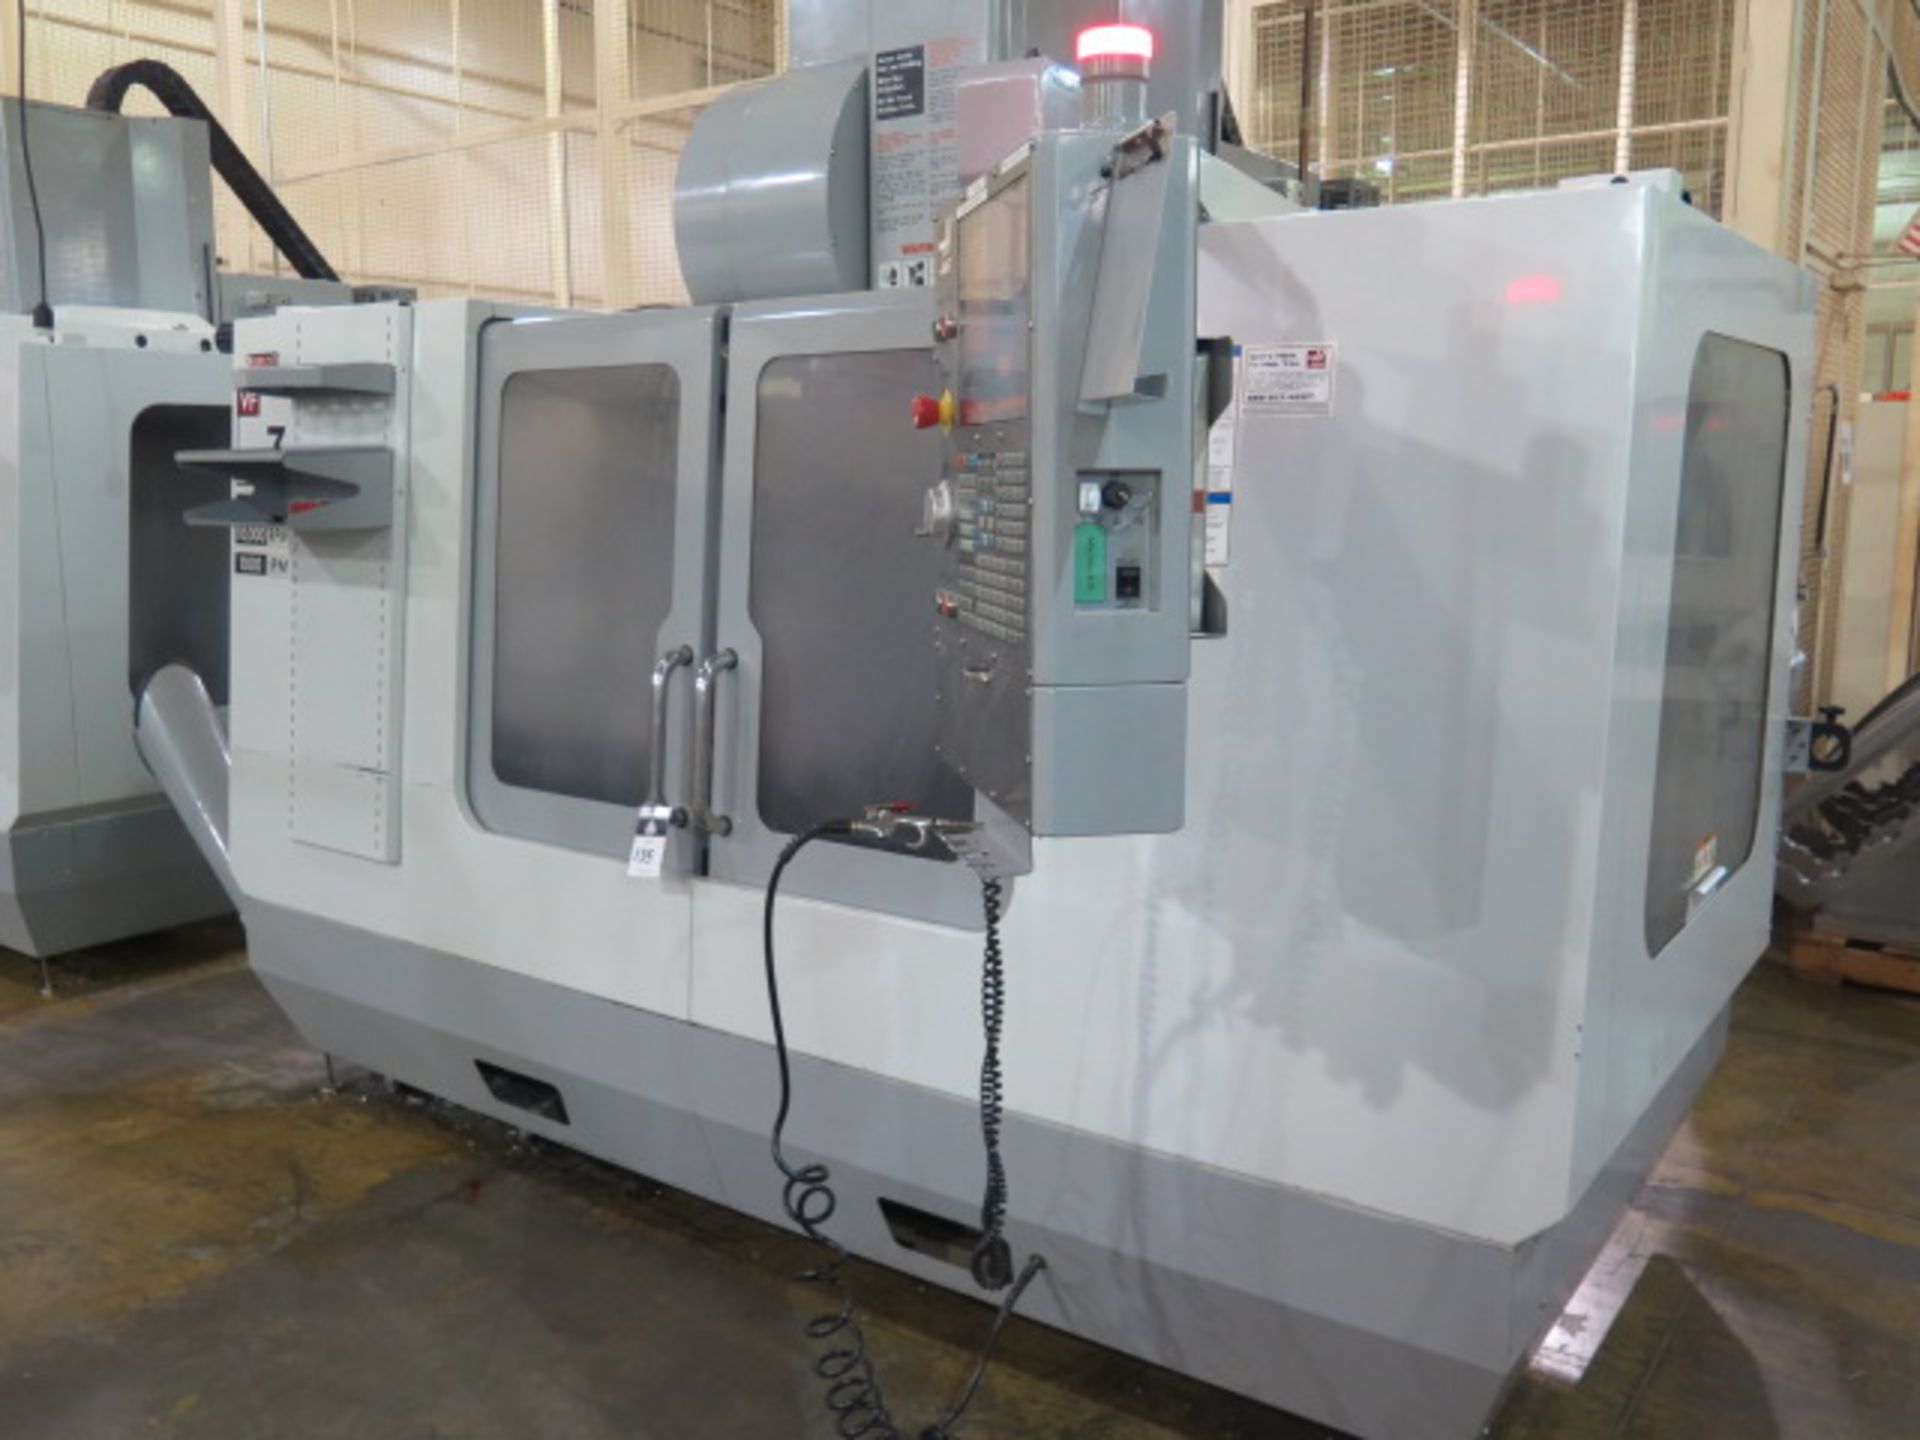 2008 Haas VF-3D 4-Axis CNC VMC s/n 1069858 w/ Haas Controls, Hand Wheel, 24-ATC, Cat 40, SOLD AS IS - Image 3 of 18